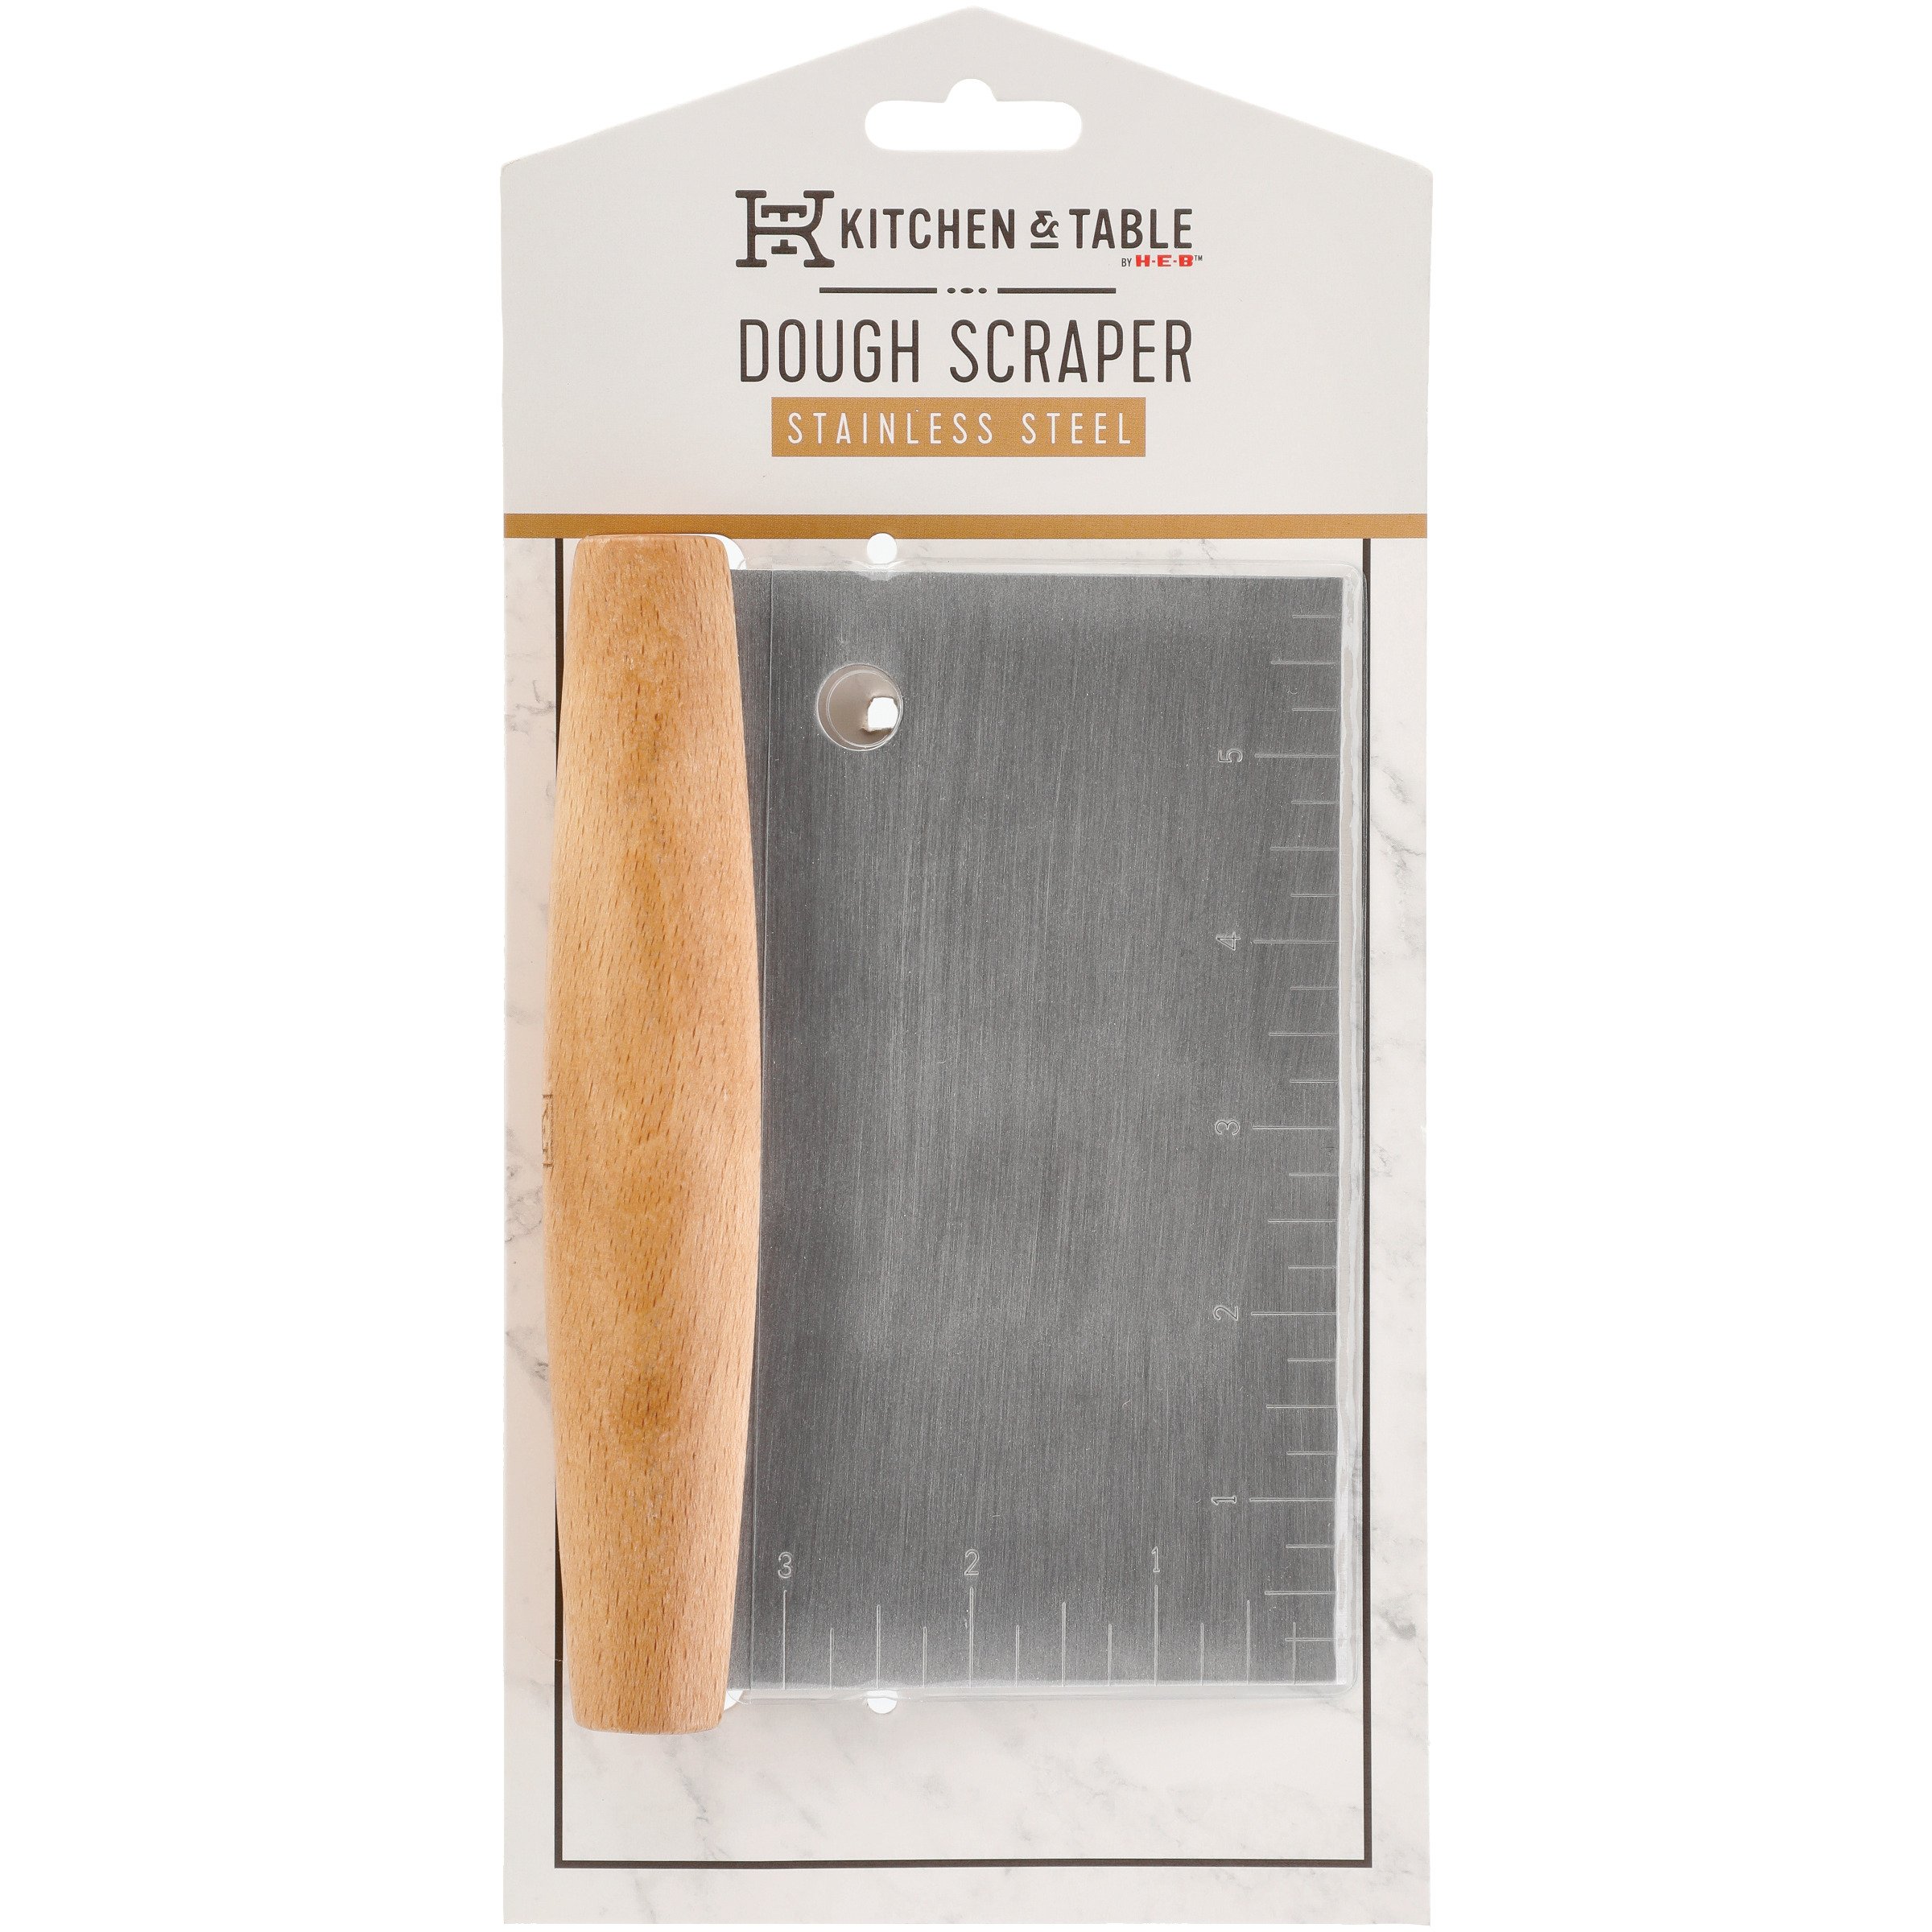 Kitchen & Table by H-E-B Stainless Steel Dough Scraper - Shop Baking Tools at H-E-B